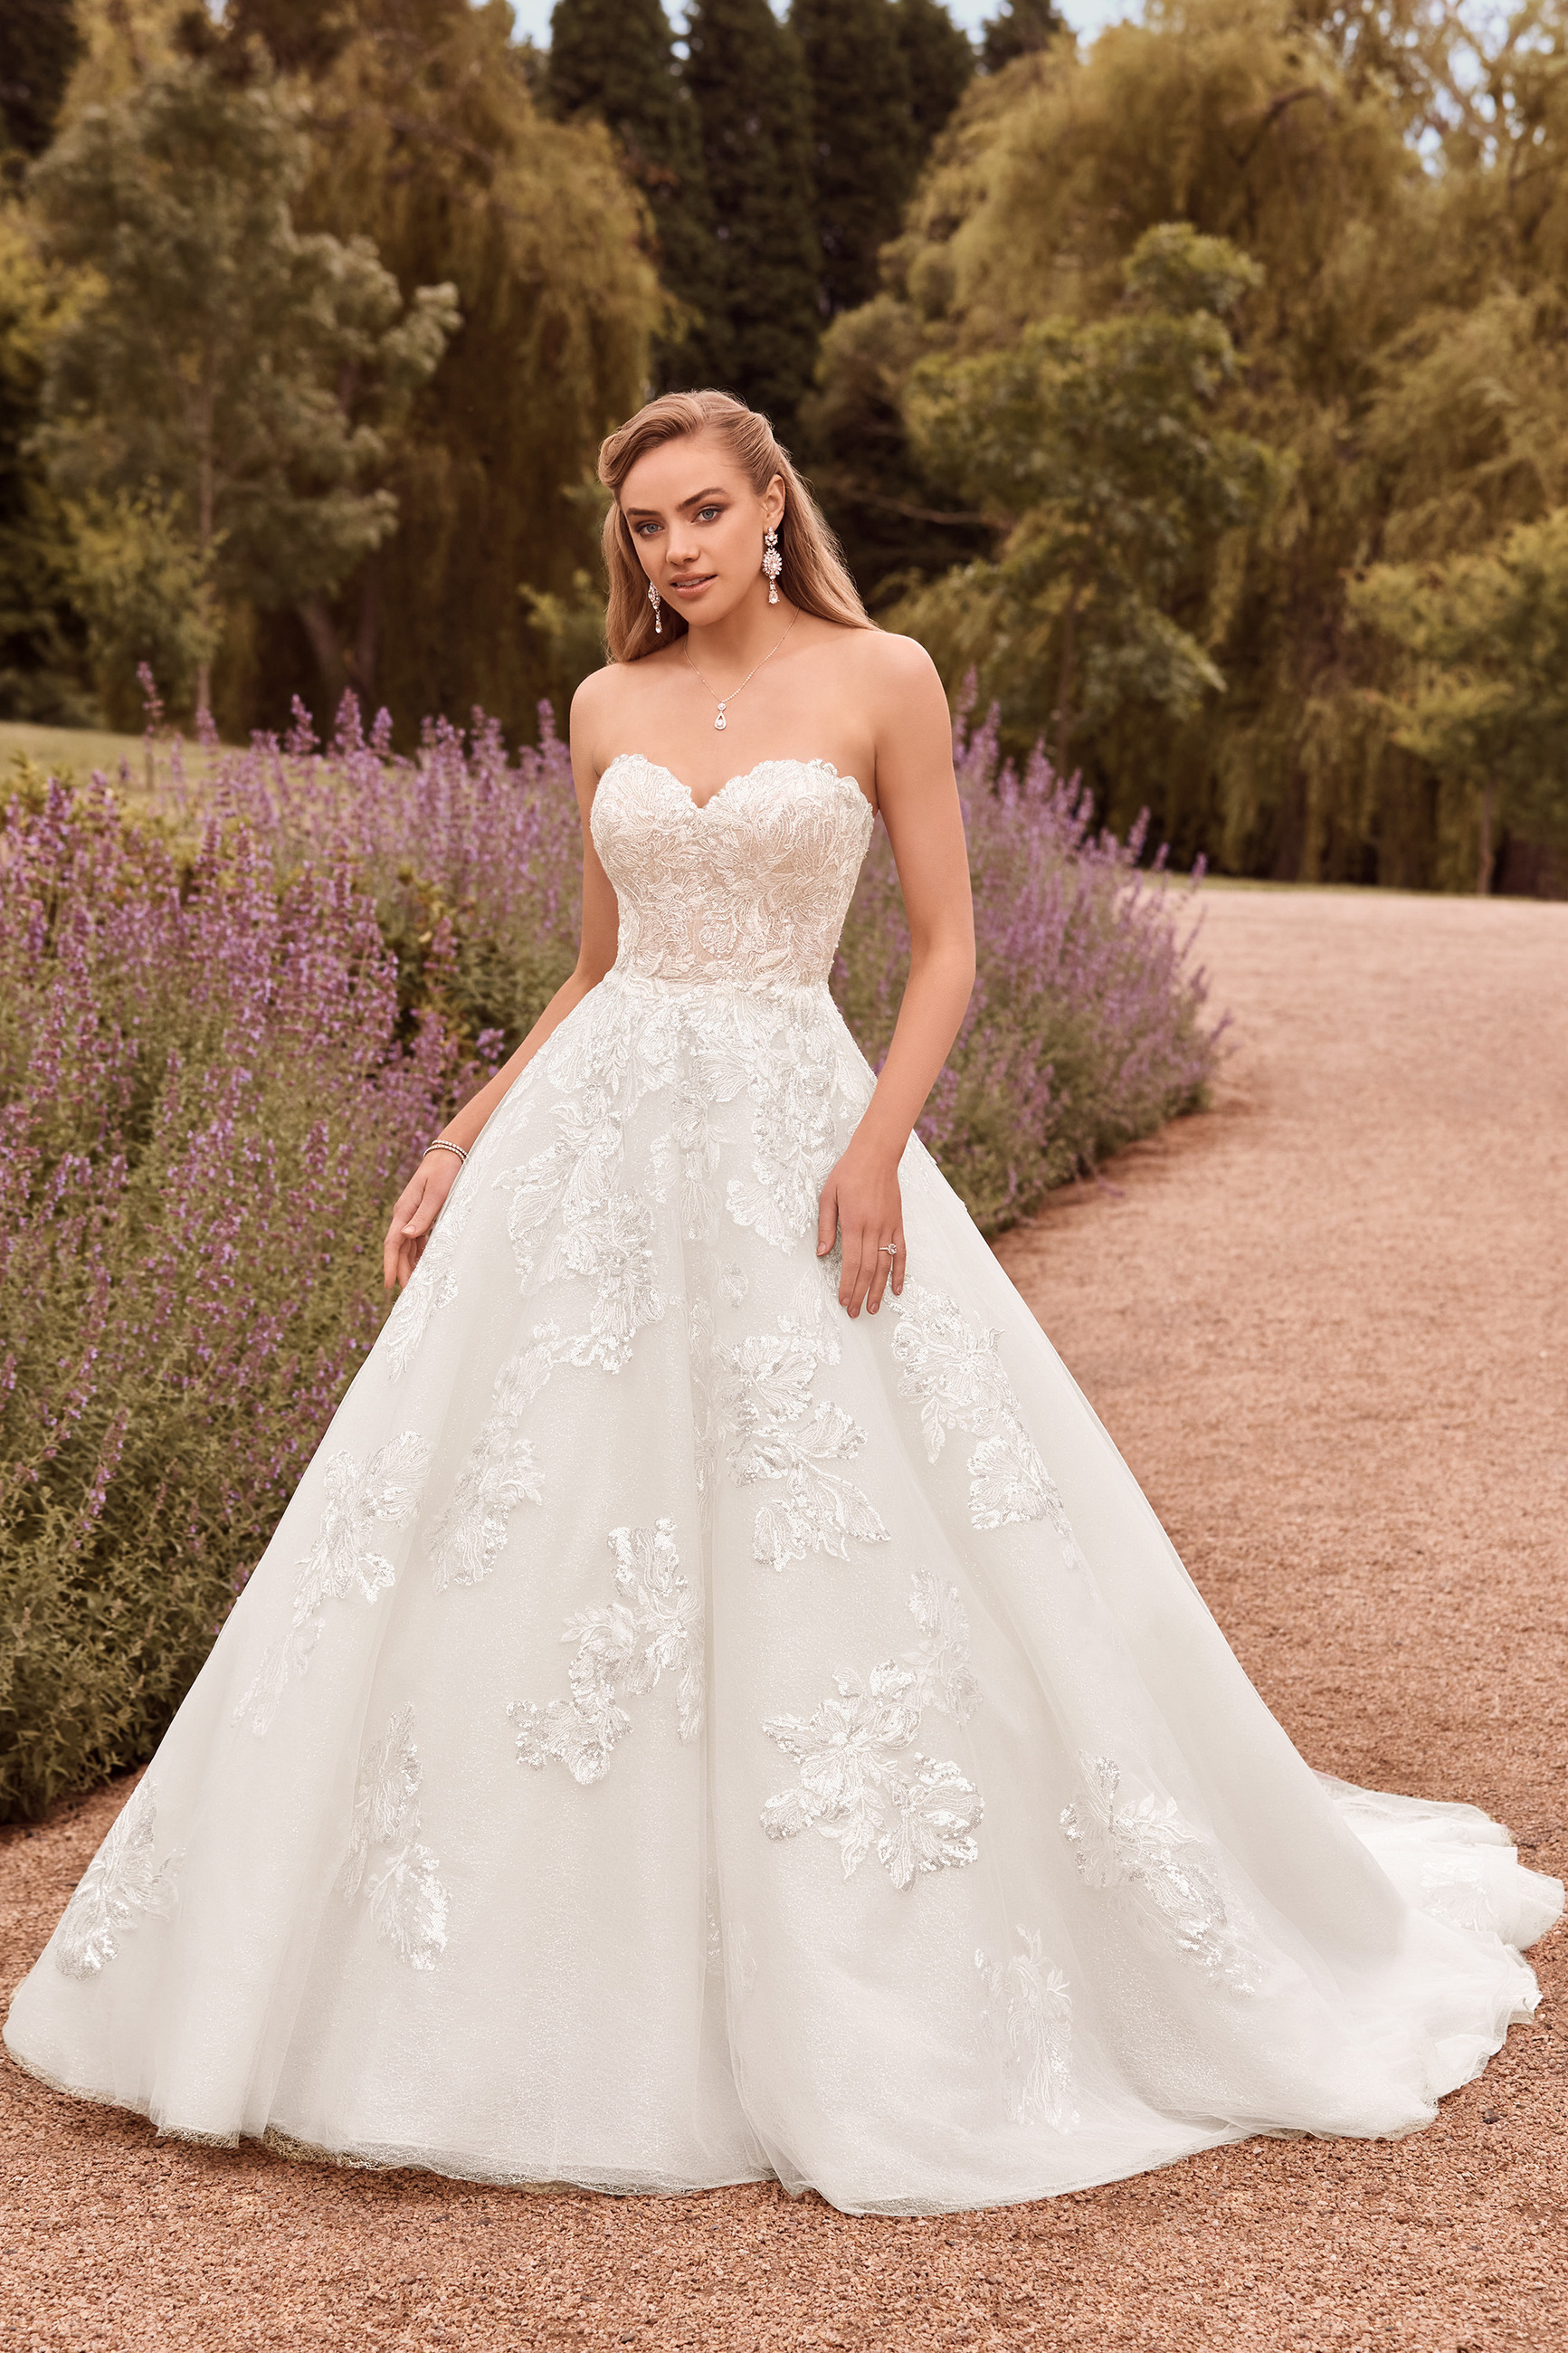 Disney princess wedding dresses now available for grown women